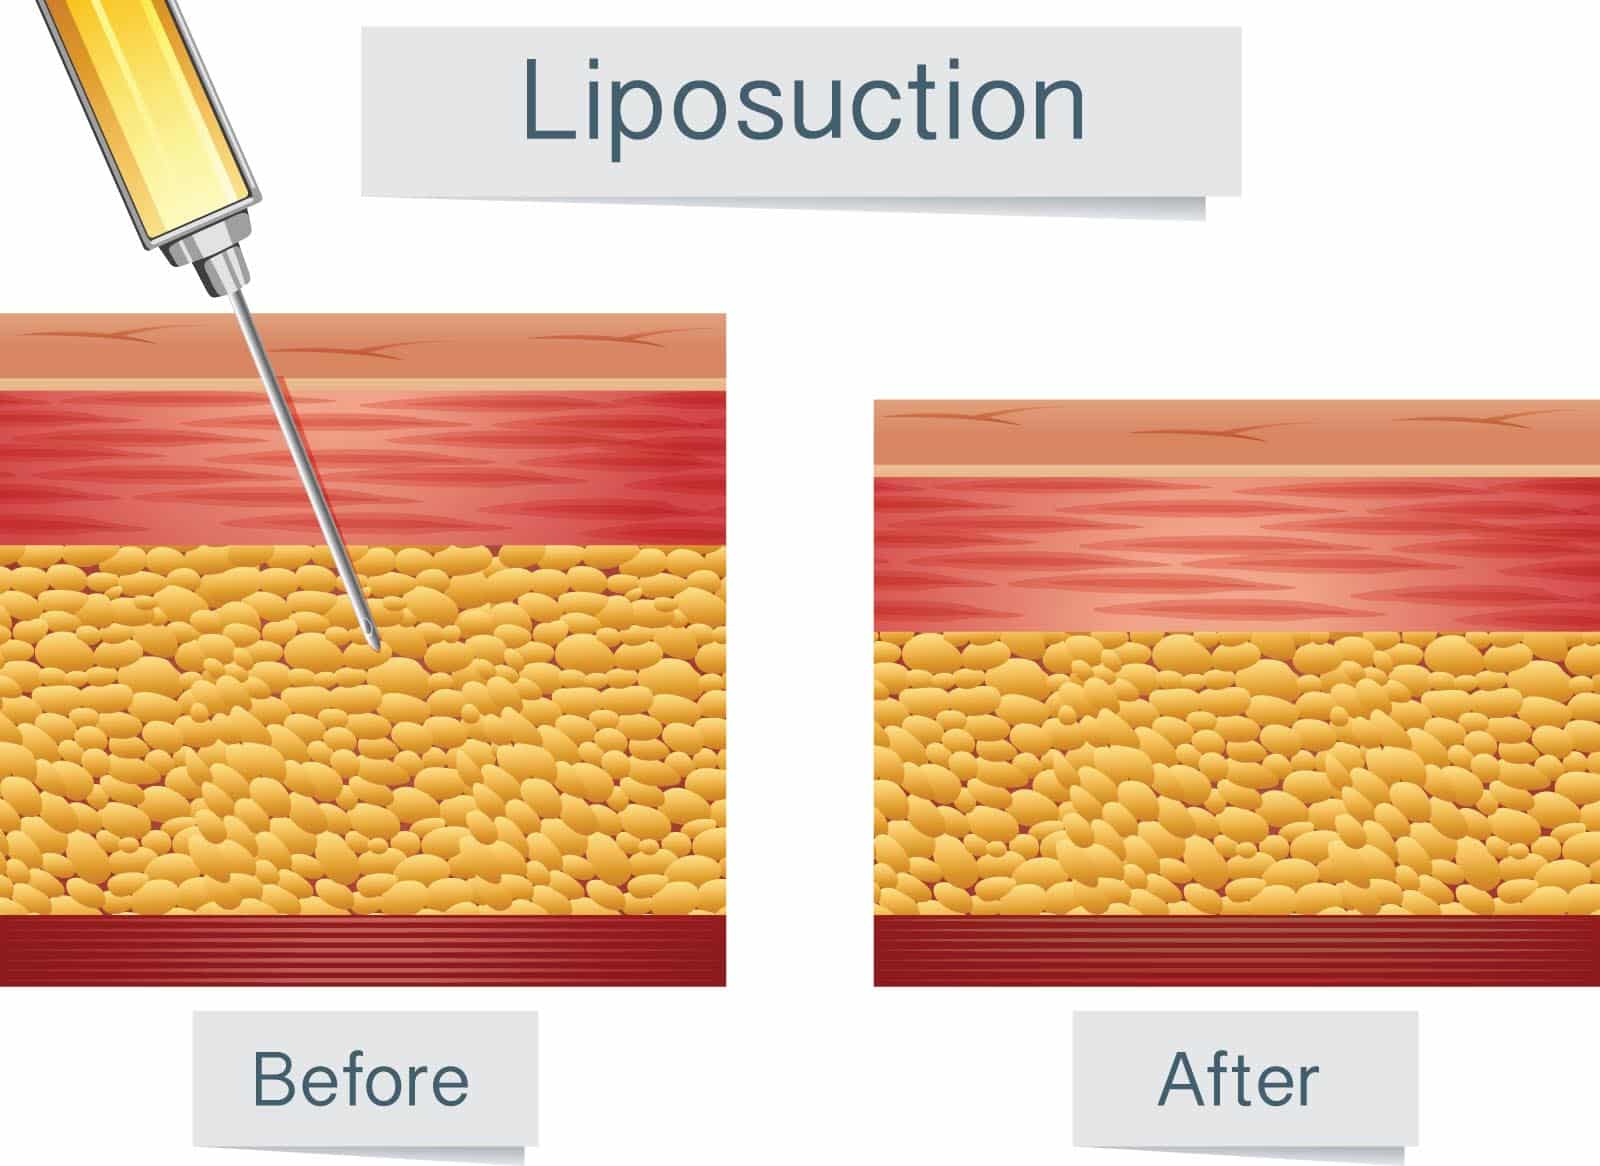 Does your body produce fat cells after liposuction? Newport Beach, CA